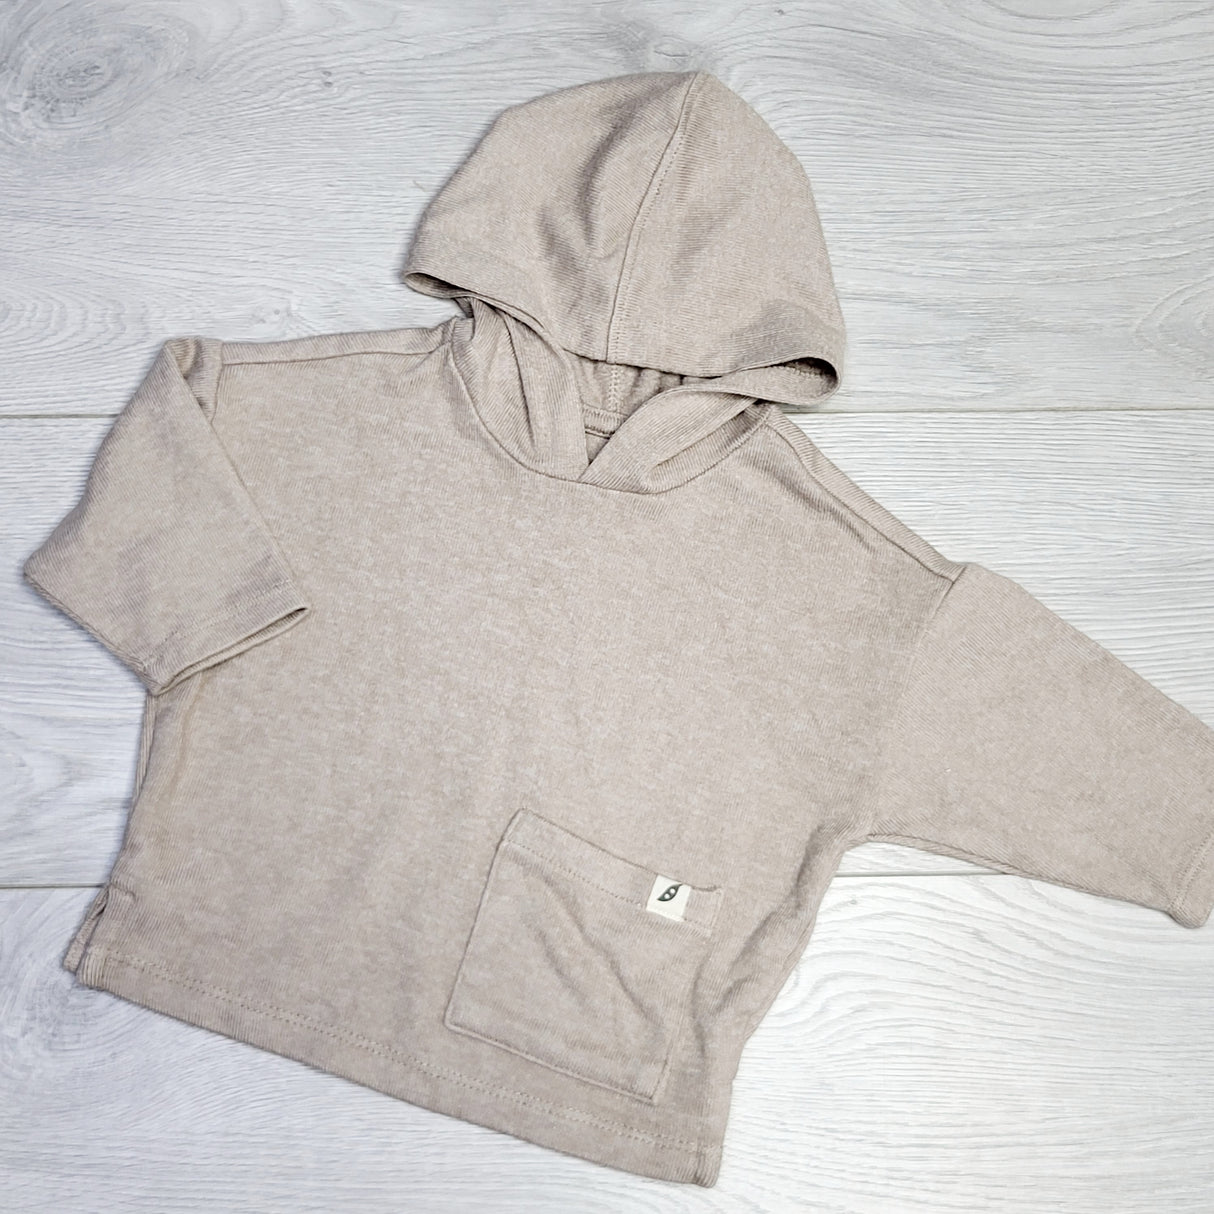 CRTH1 - Easy Peasy rayon blend hoodie. Size 0-3 months